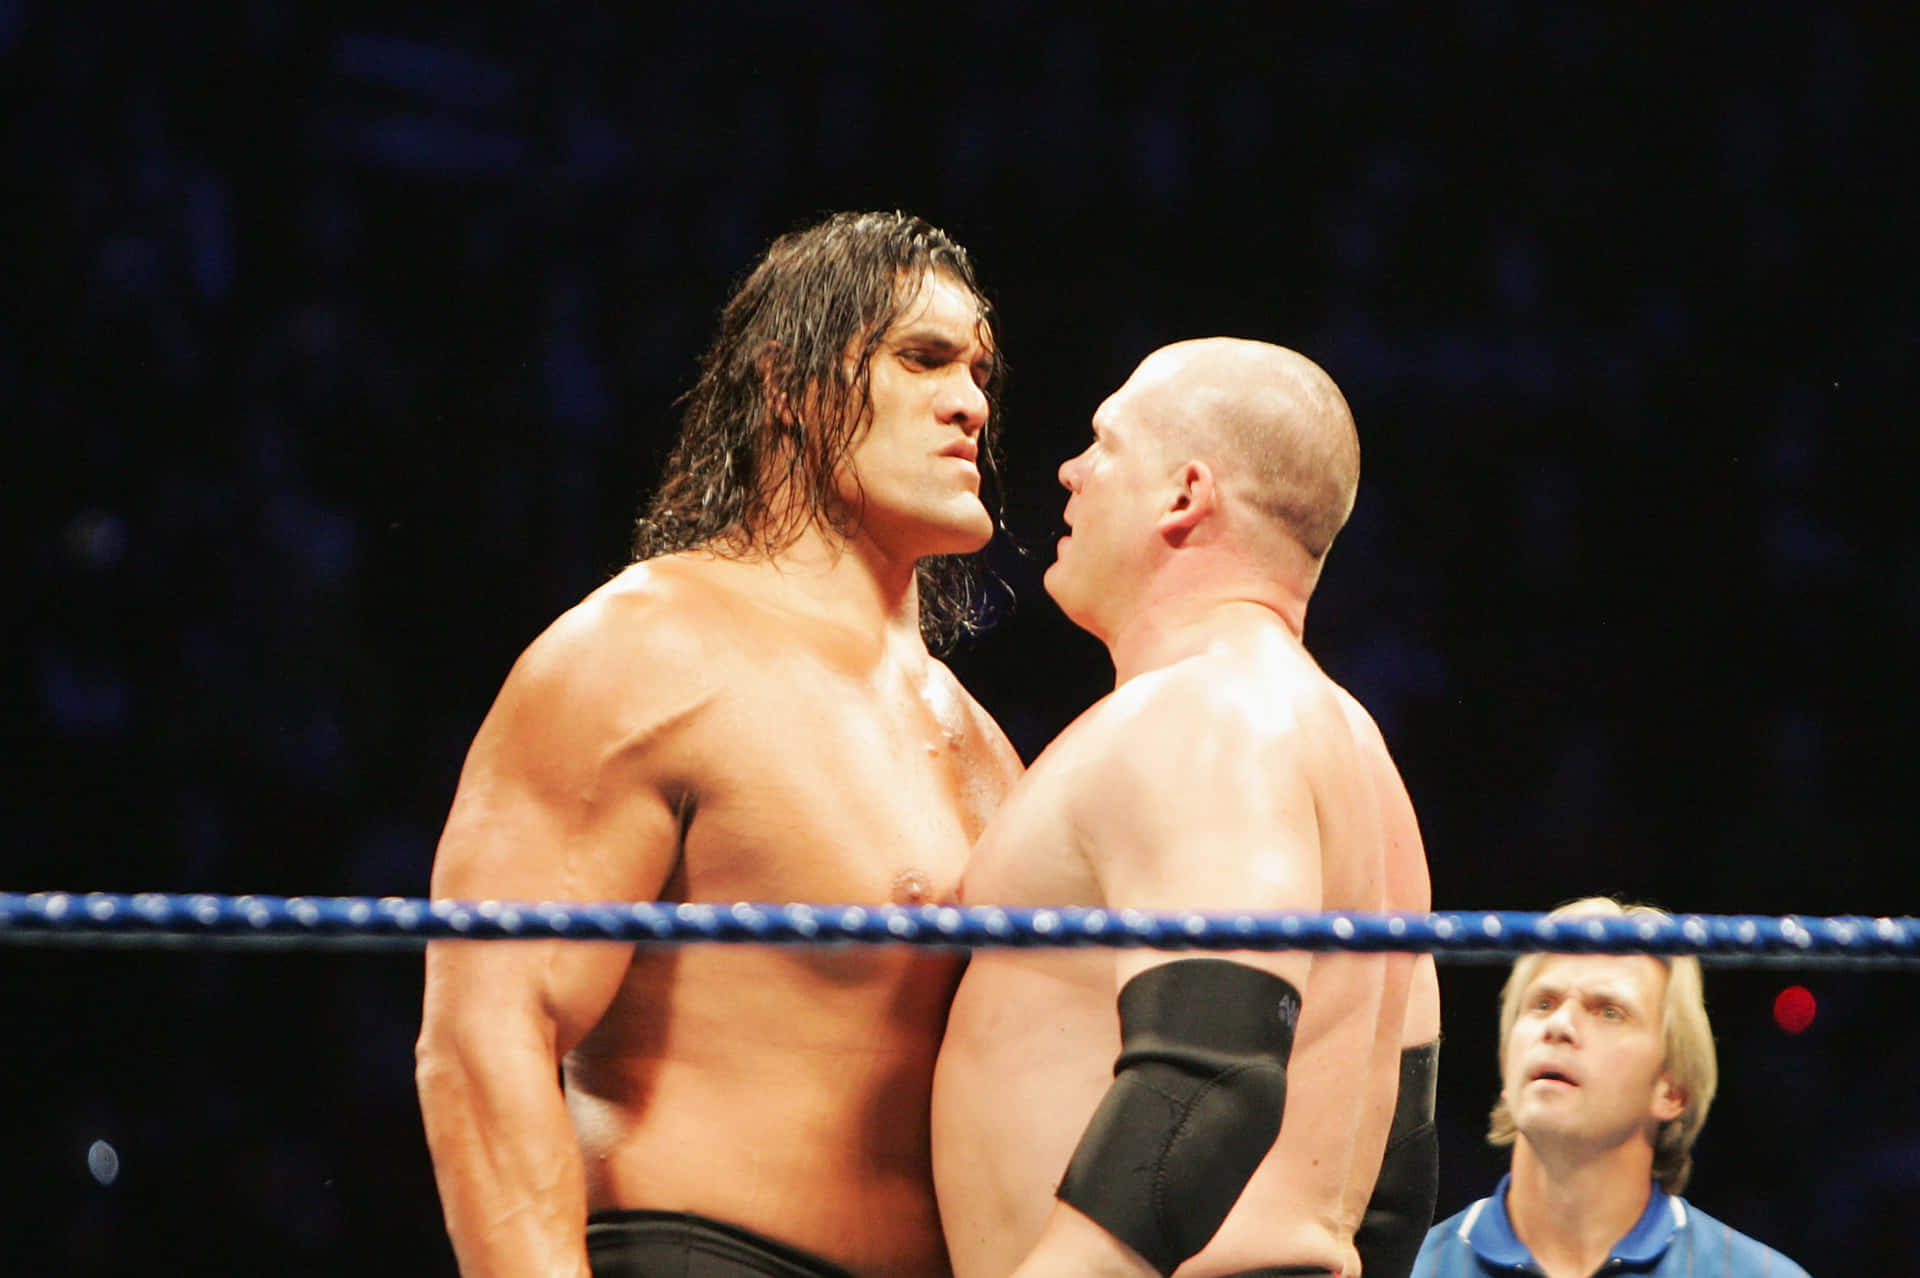 The Indian wrestling sensation, The Great Khali, simultaneously thrilling and intimidating in a face-off with Kane. Wallpaper